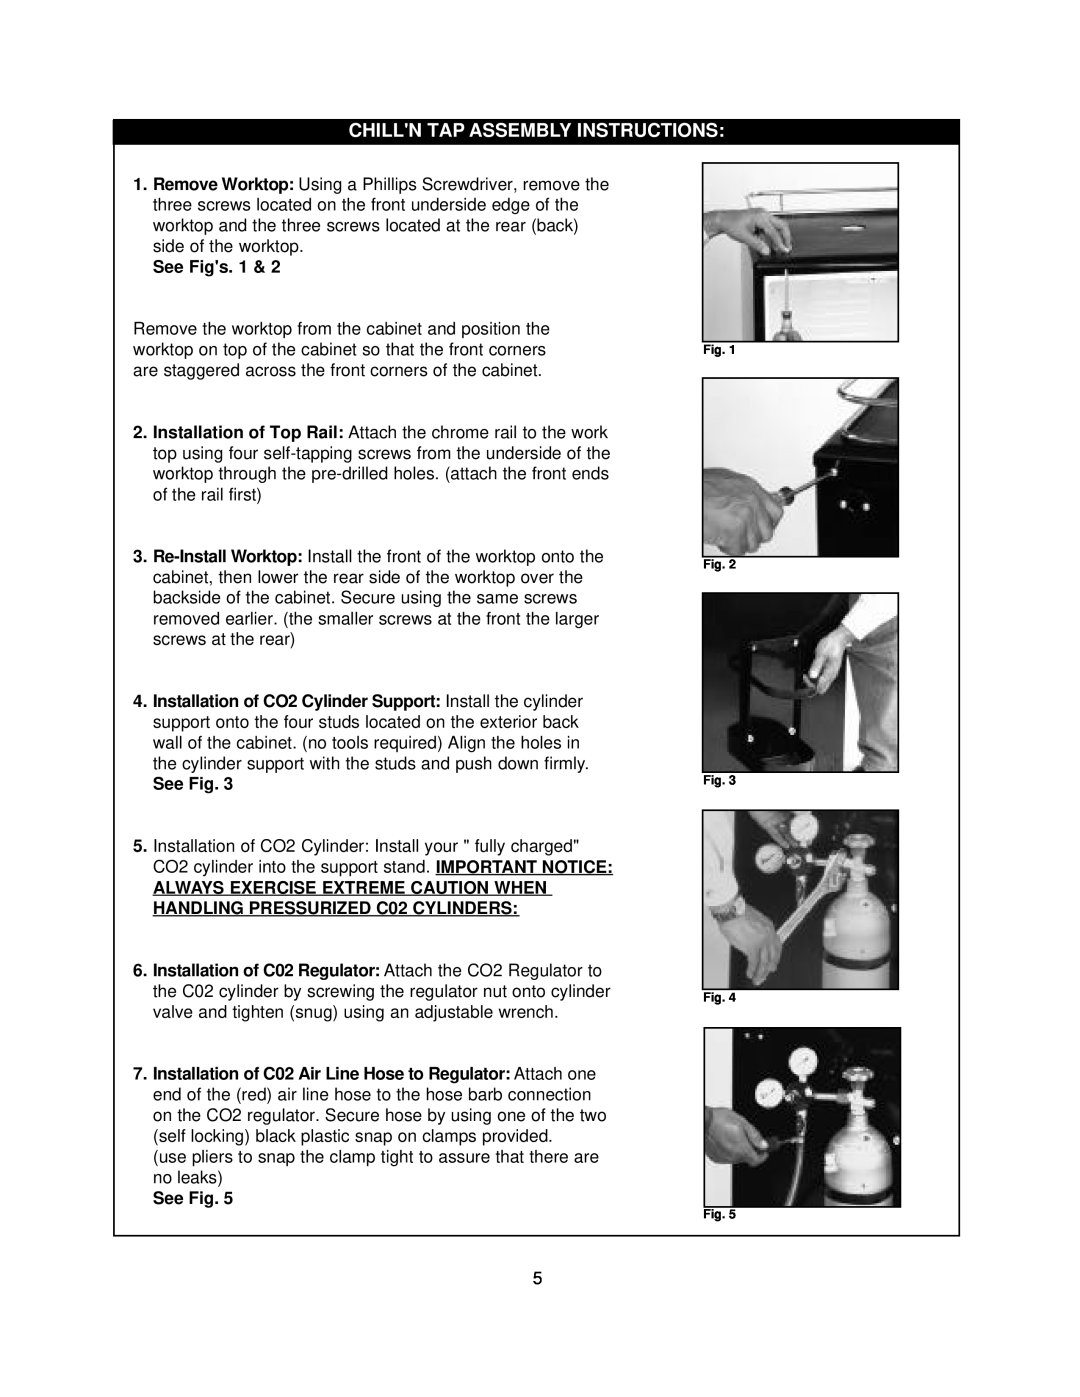 Danby DKC445BL manual Chilln Tapassembly Instructions, See Figs. 1 